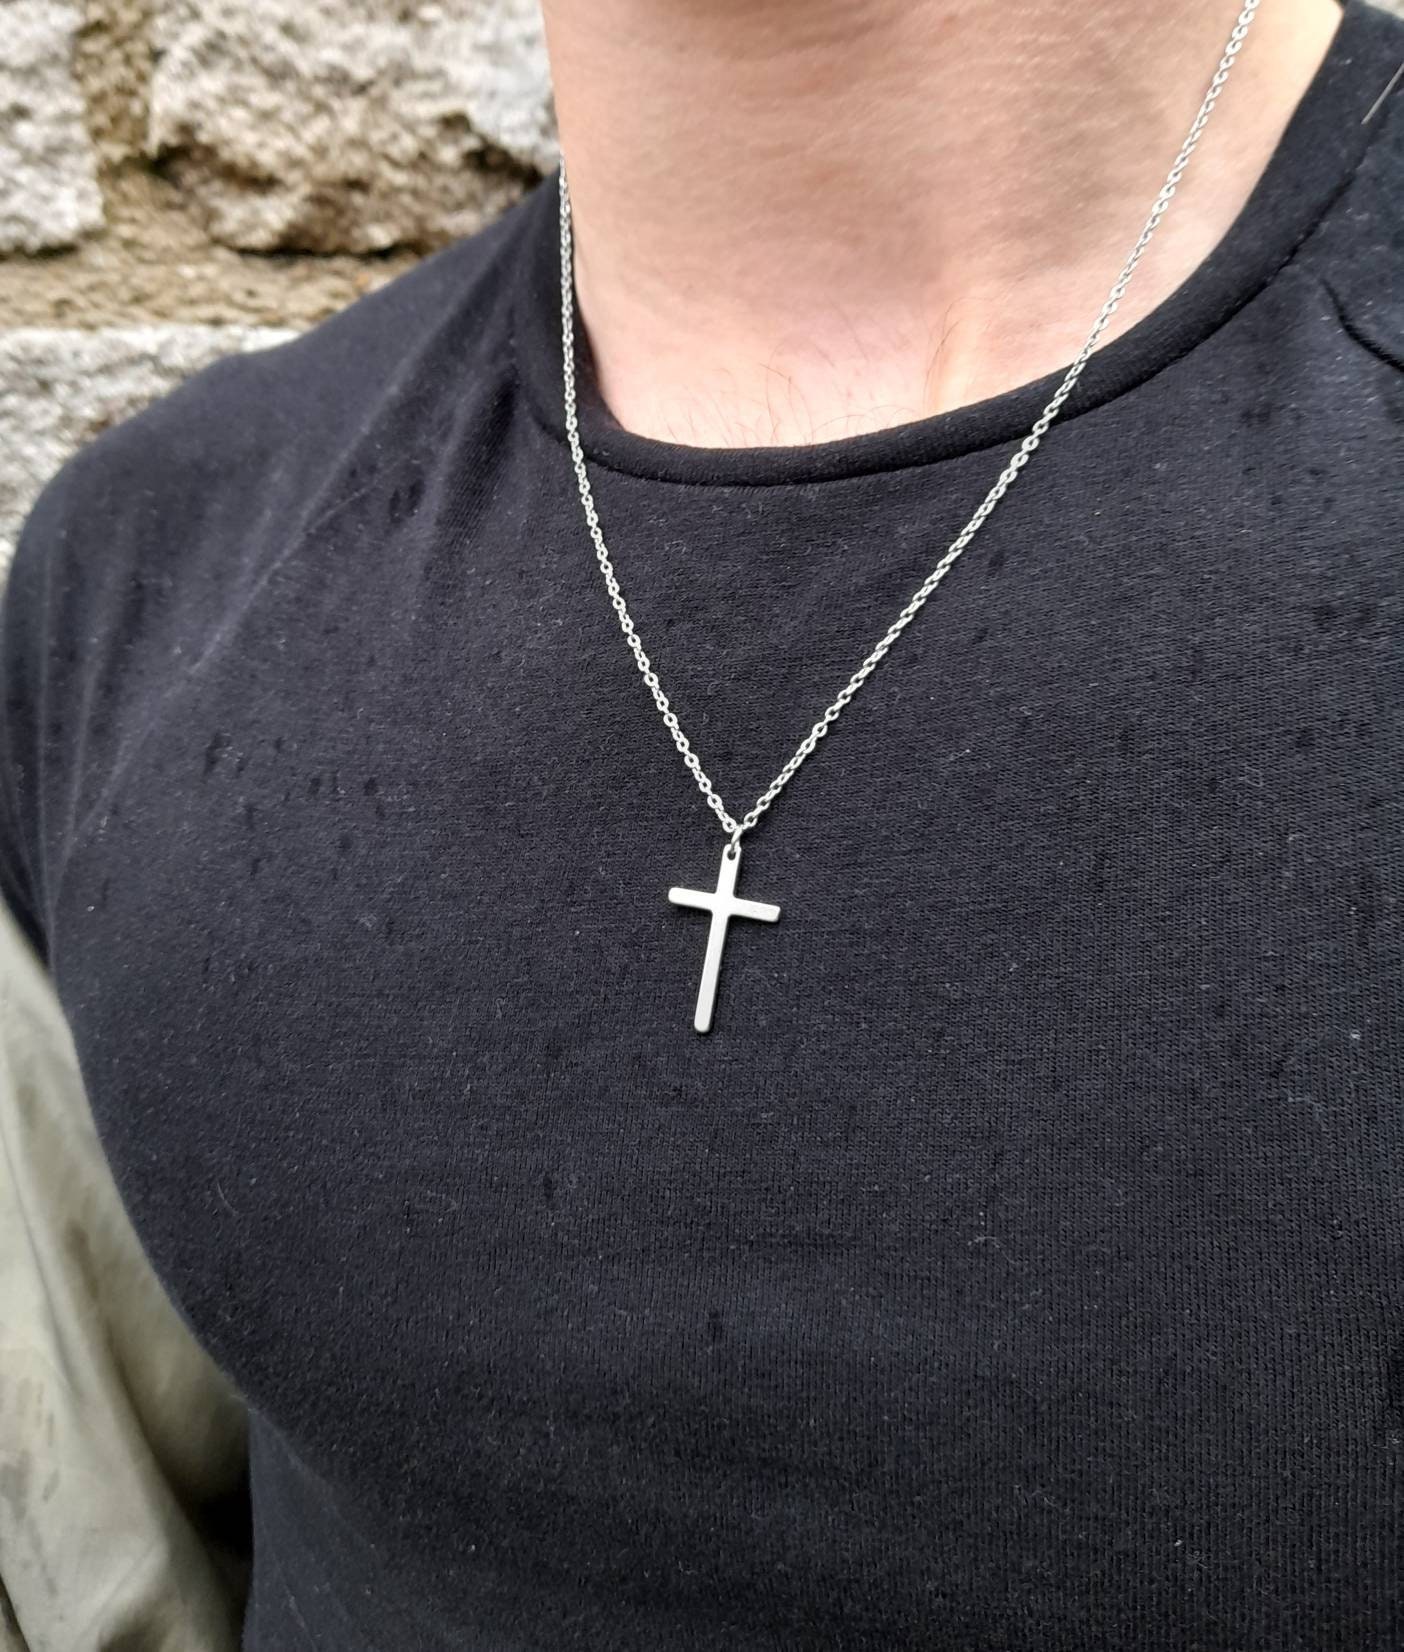 Stainless Steel Necklace Cross Pendant for Him or Her High - Etsy UK